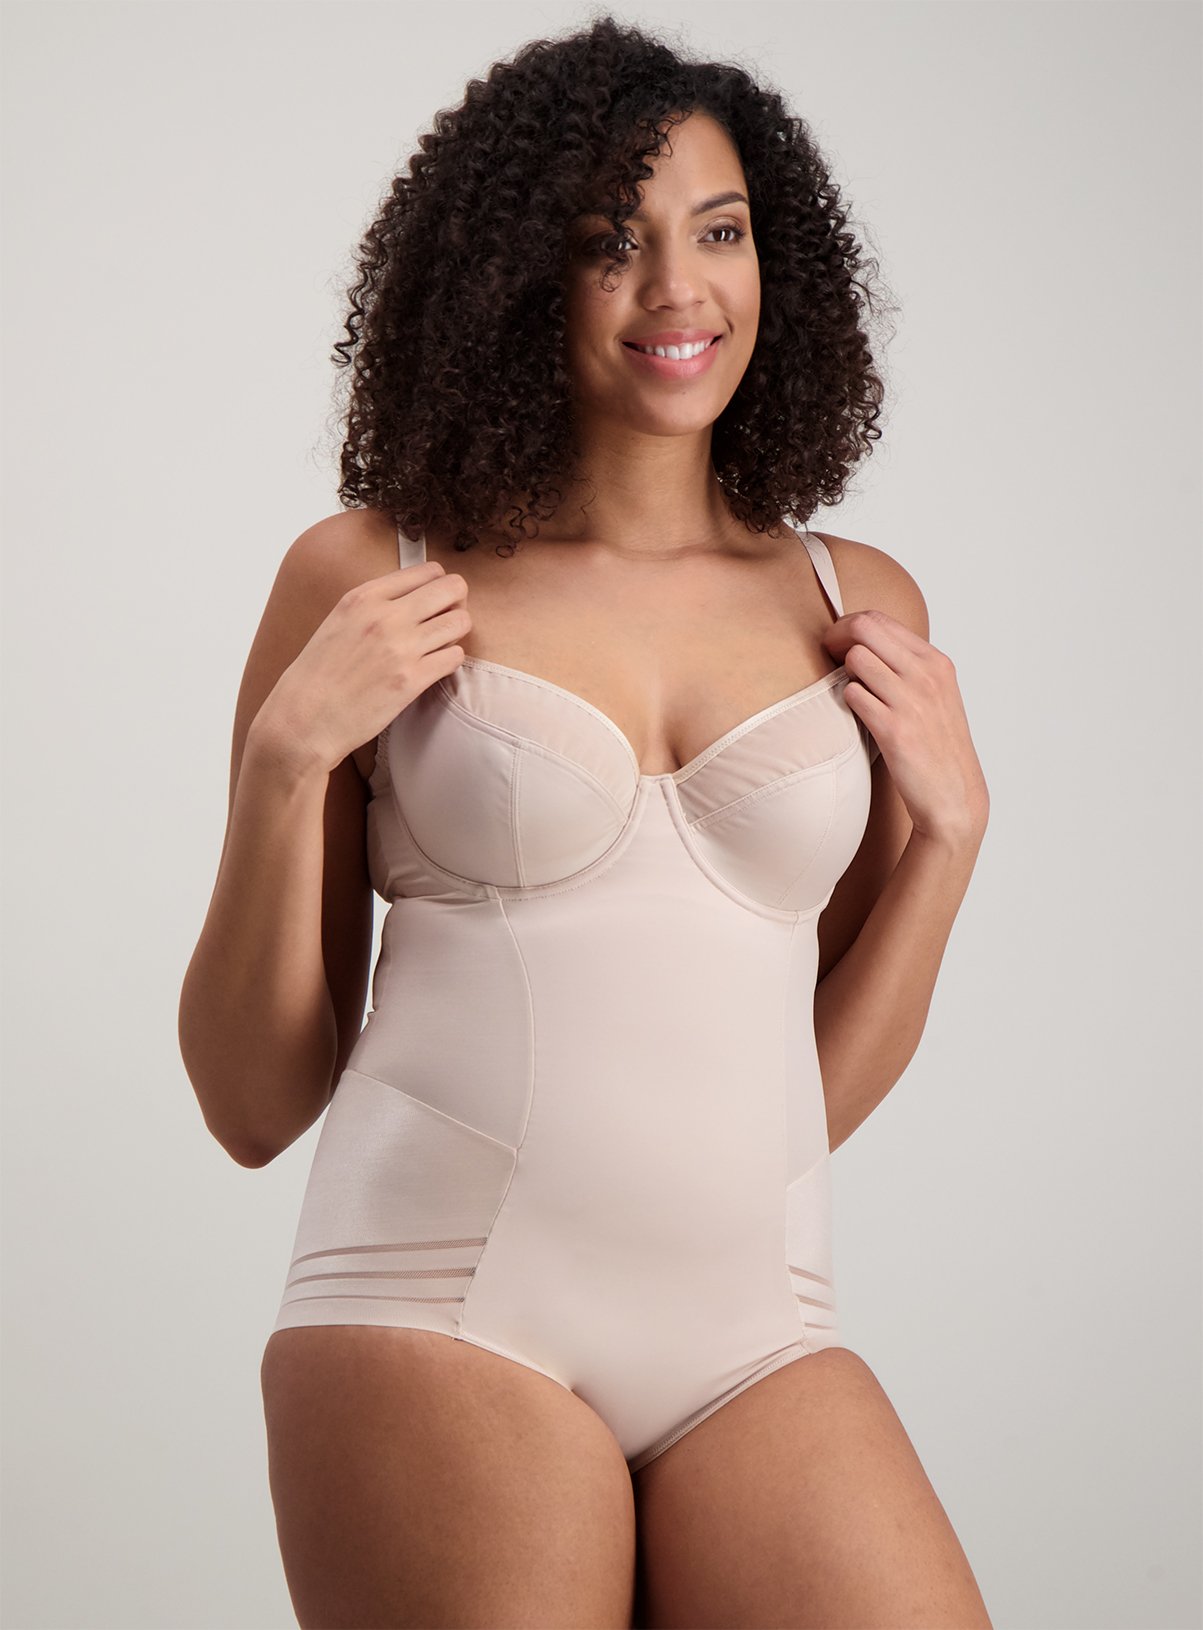 shapewear next day delivery